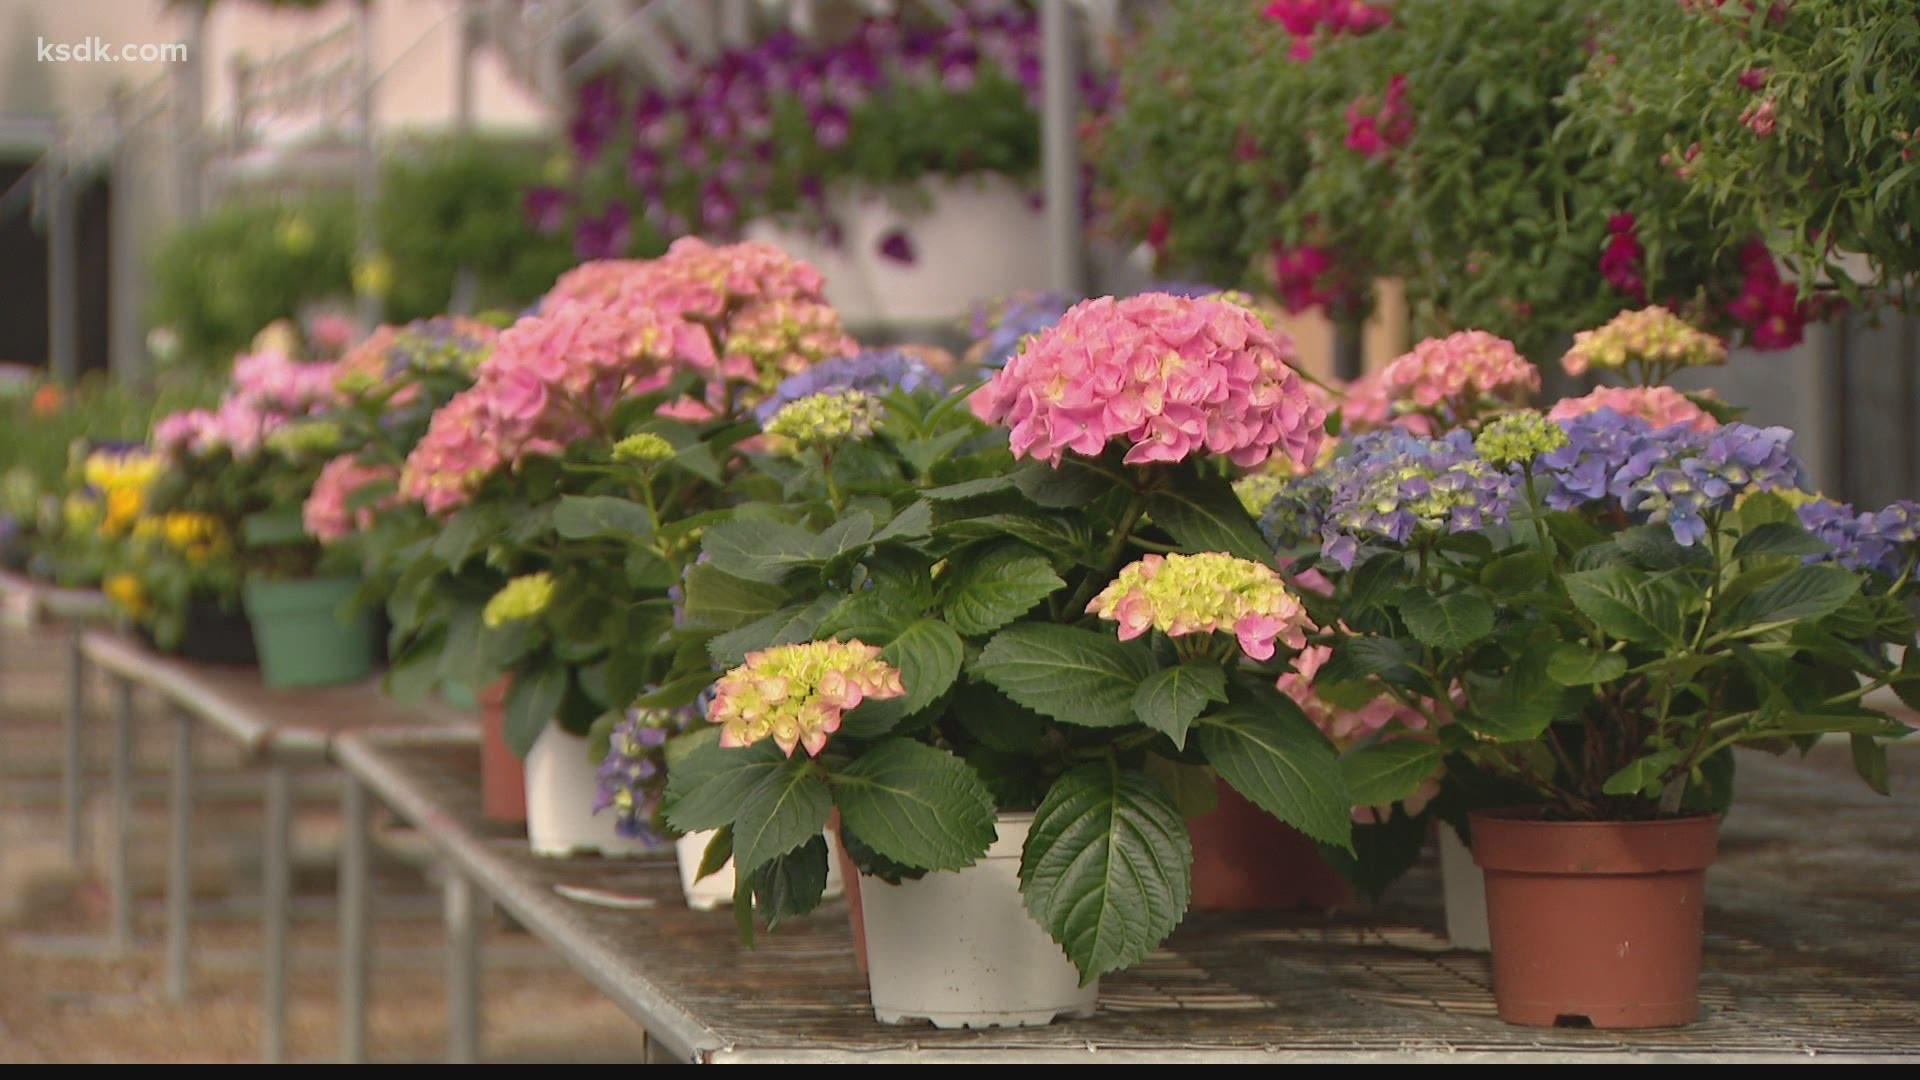 With temperatures dipping below freezing, you plants might need something to keep them safe